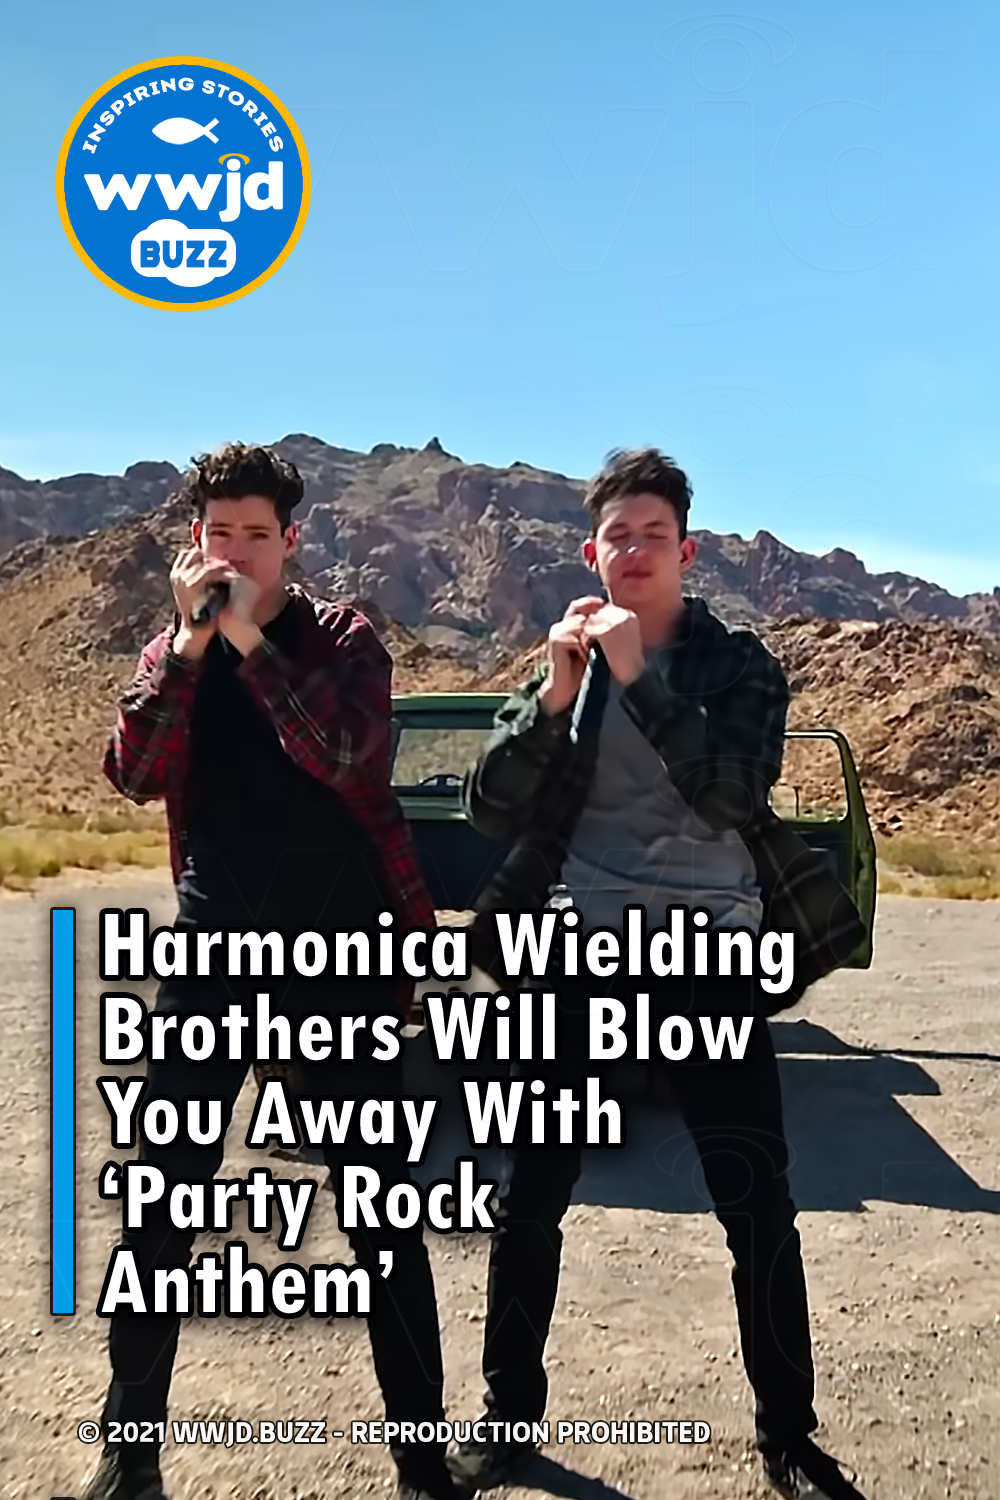 Harmonica Wielding Brothers Will Blow You Away With ‘Party Rock Anthem’